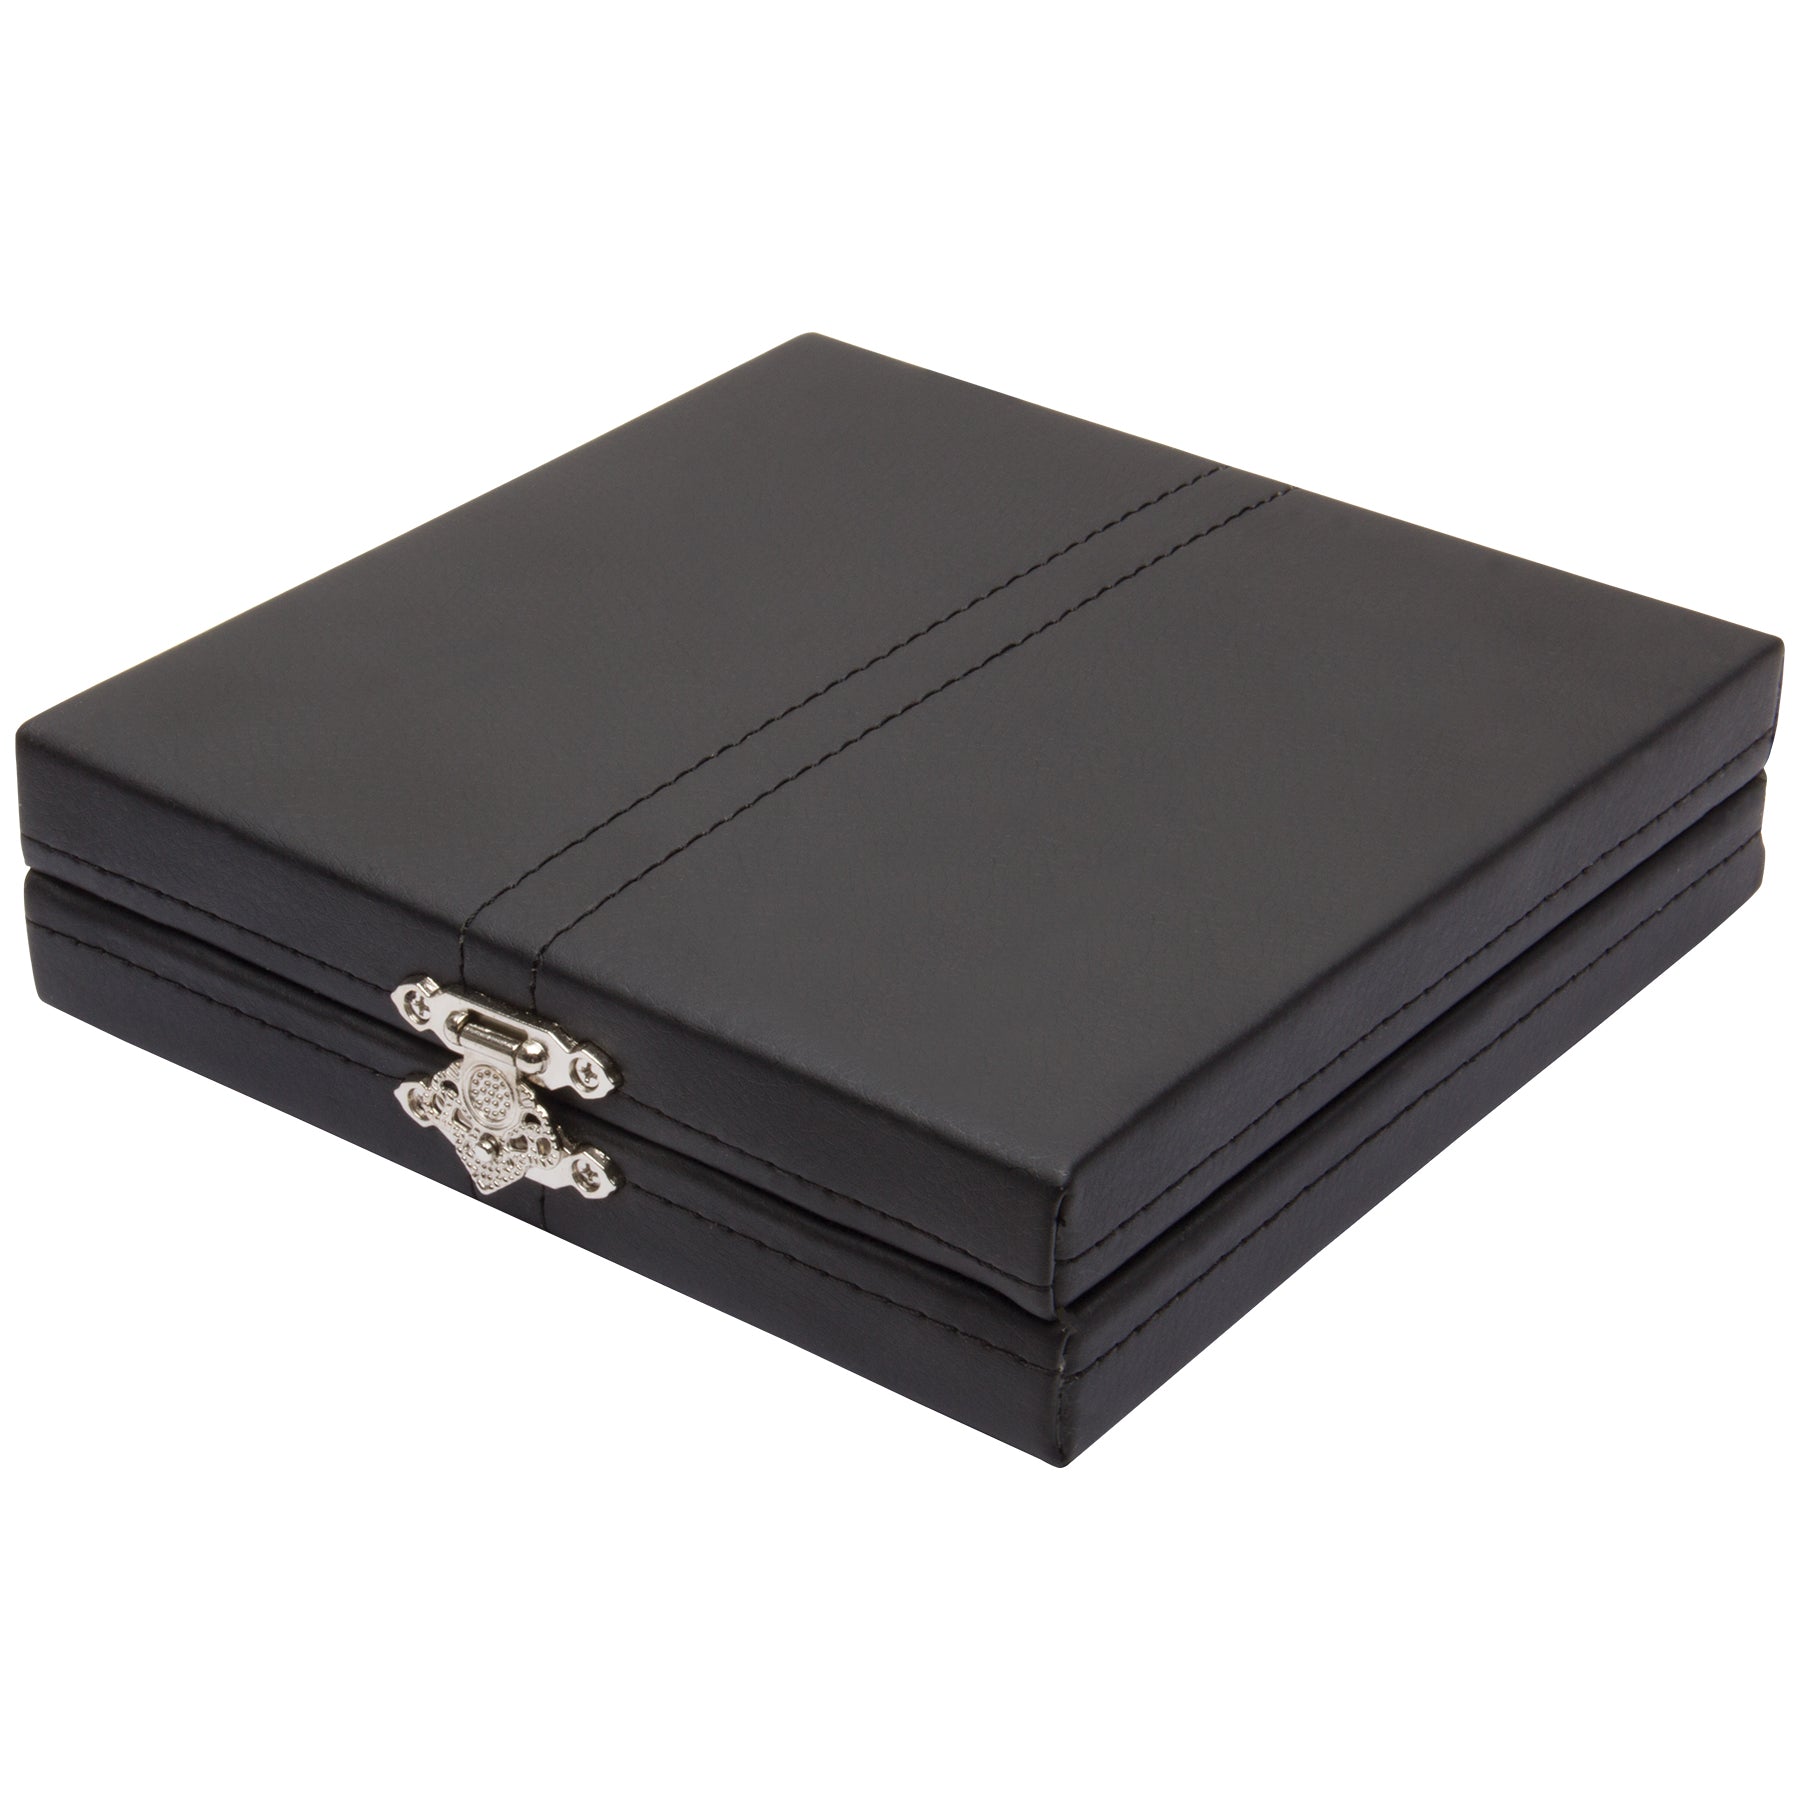 Deluxe DVD/CD Folio with Leatherette Box